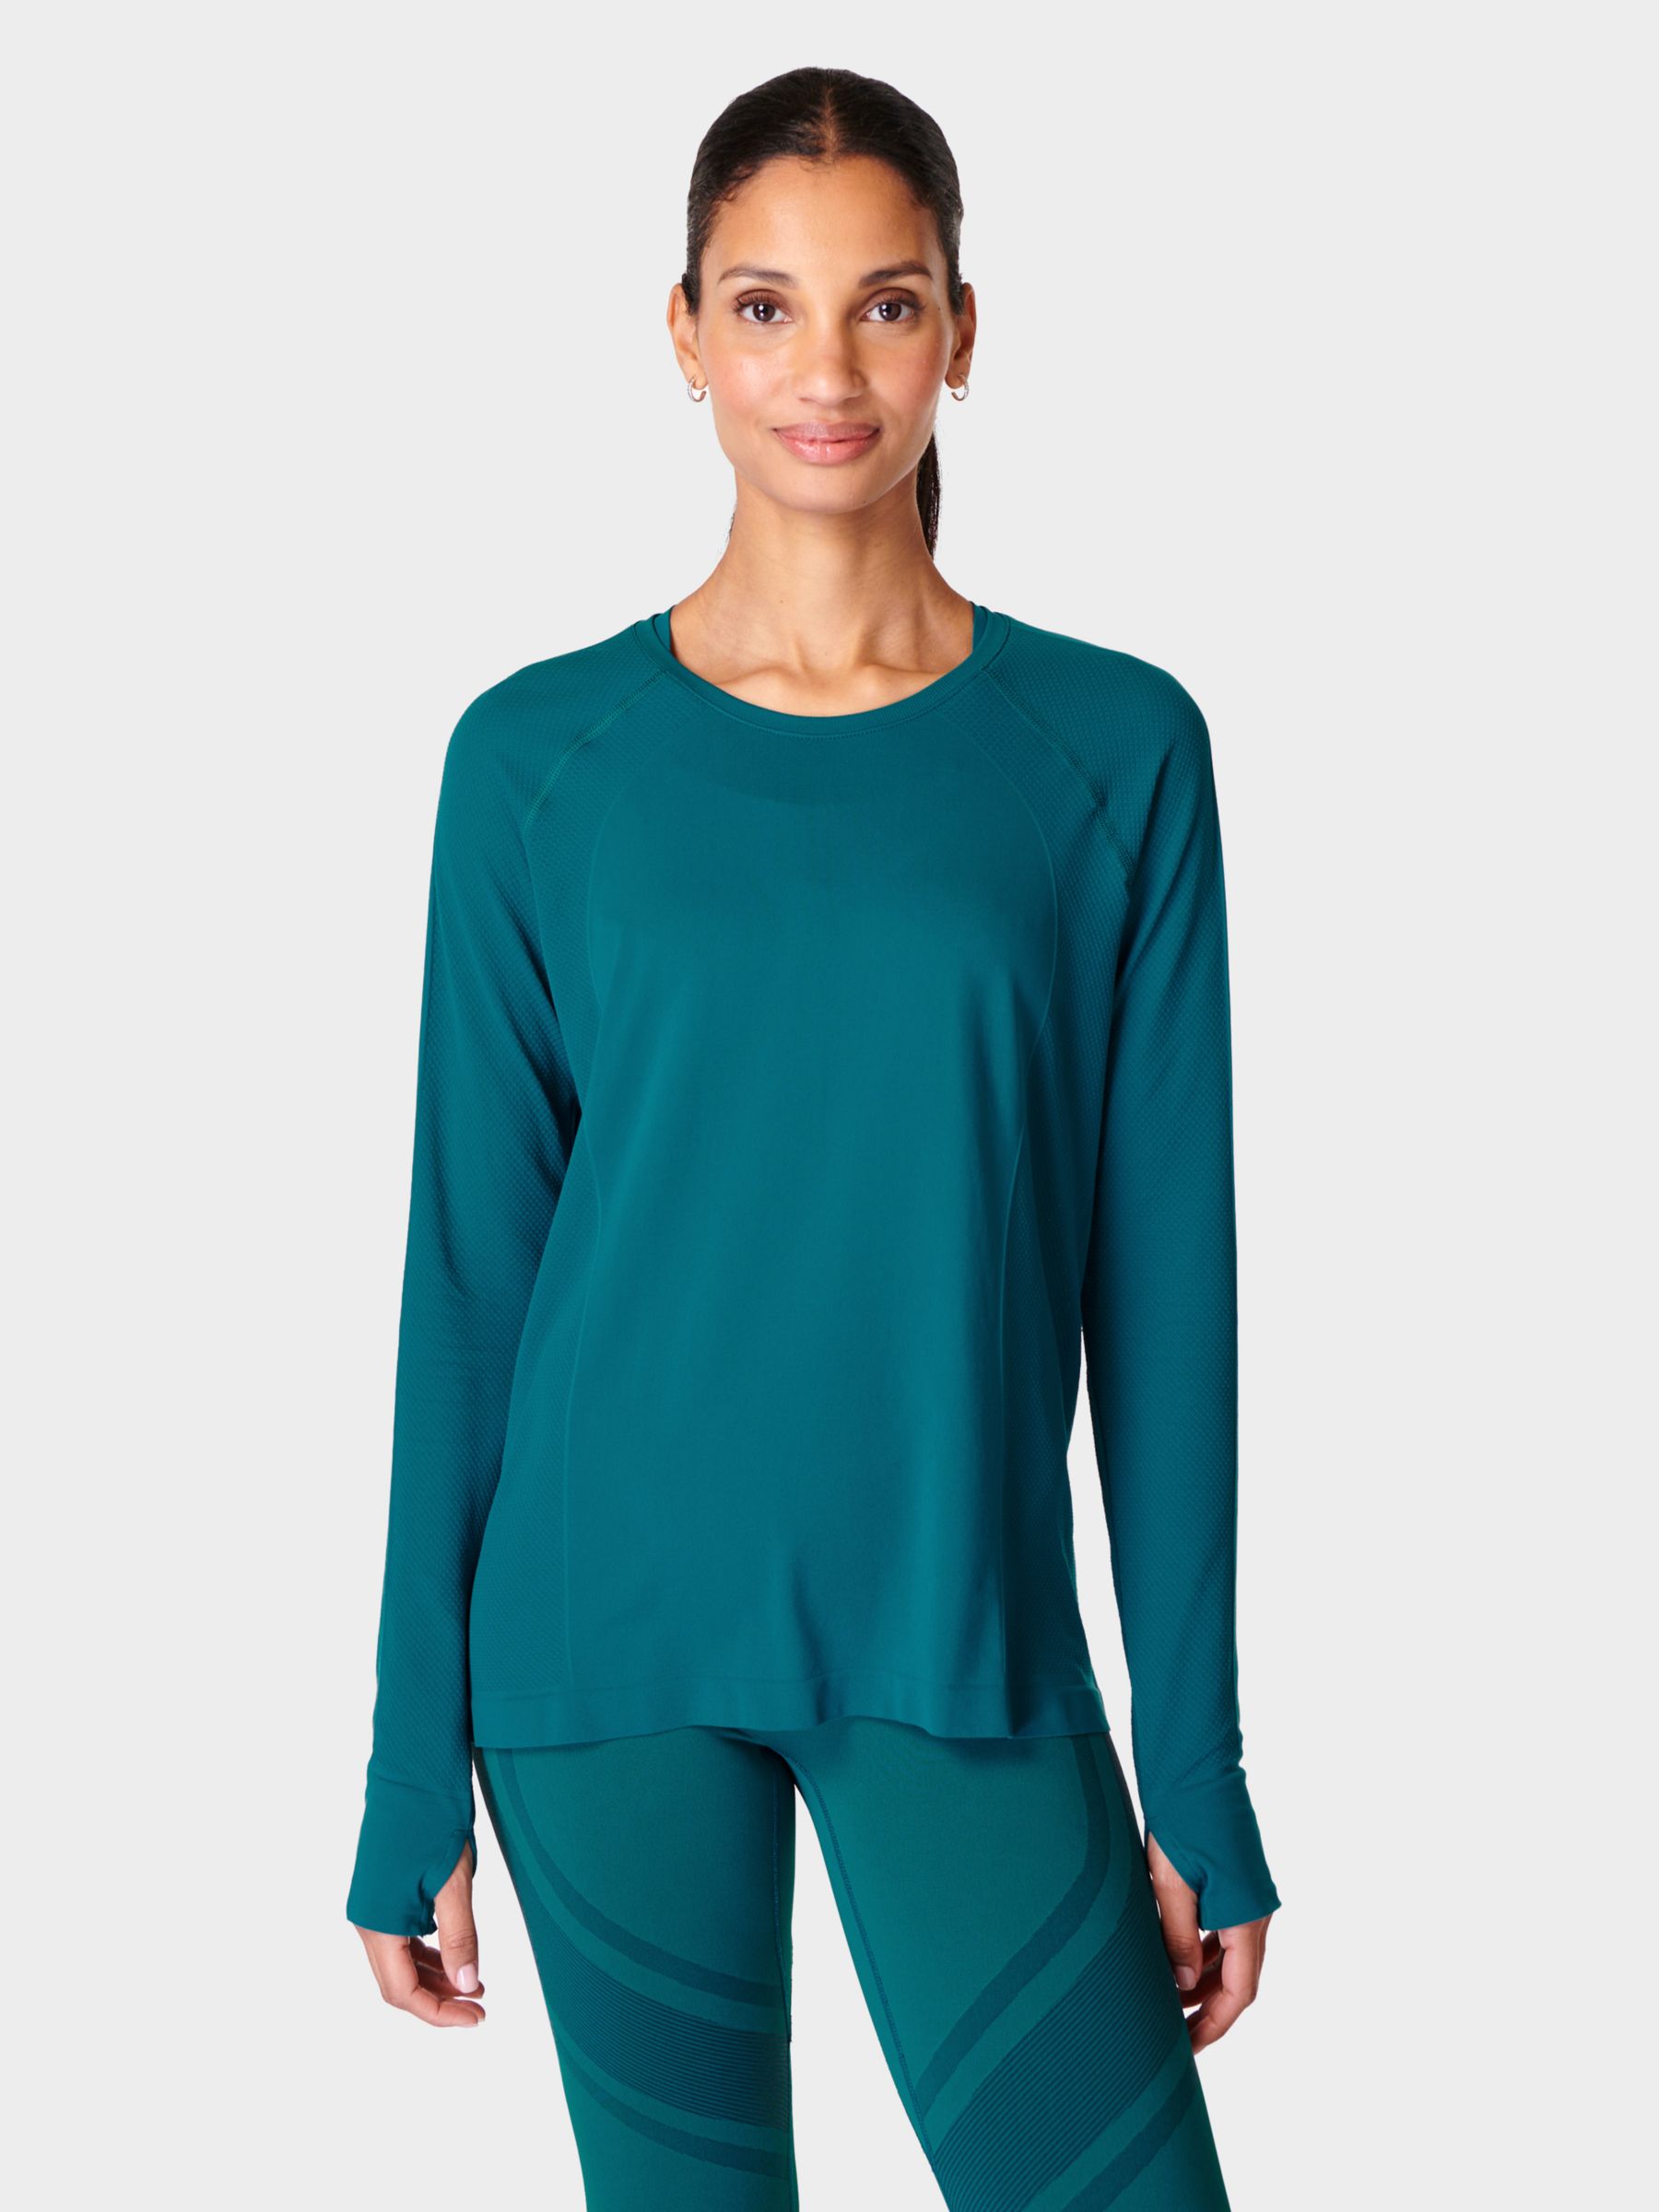 Sweaty Betty Athlete Seamless Featherweight Long Sleeve Top, Reef Teal Blue, XS-S